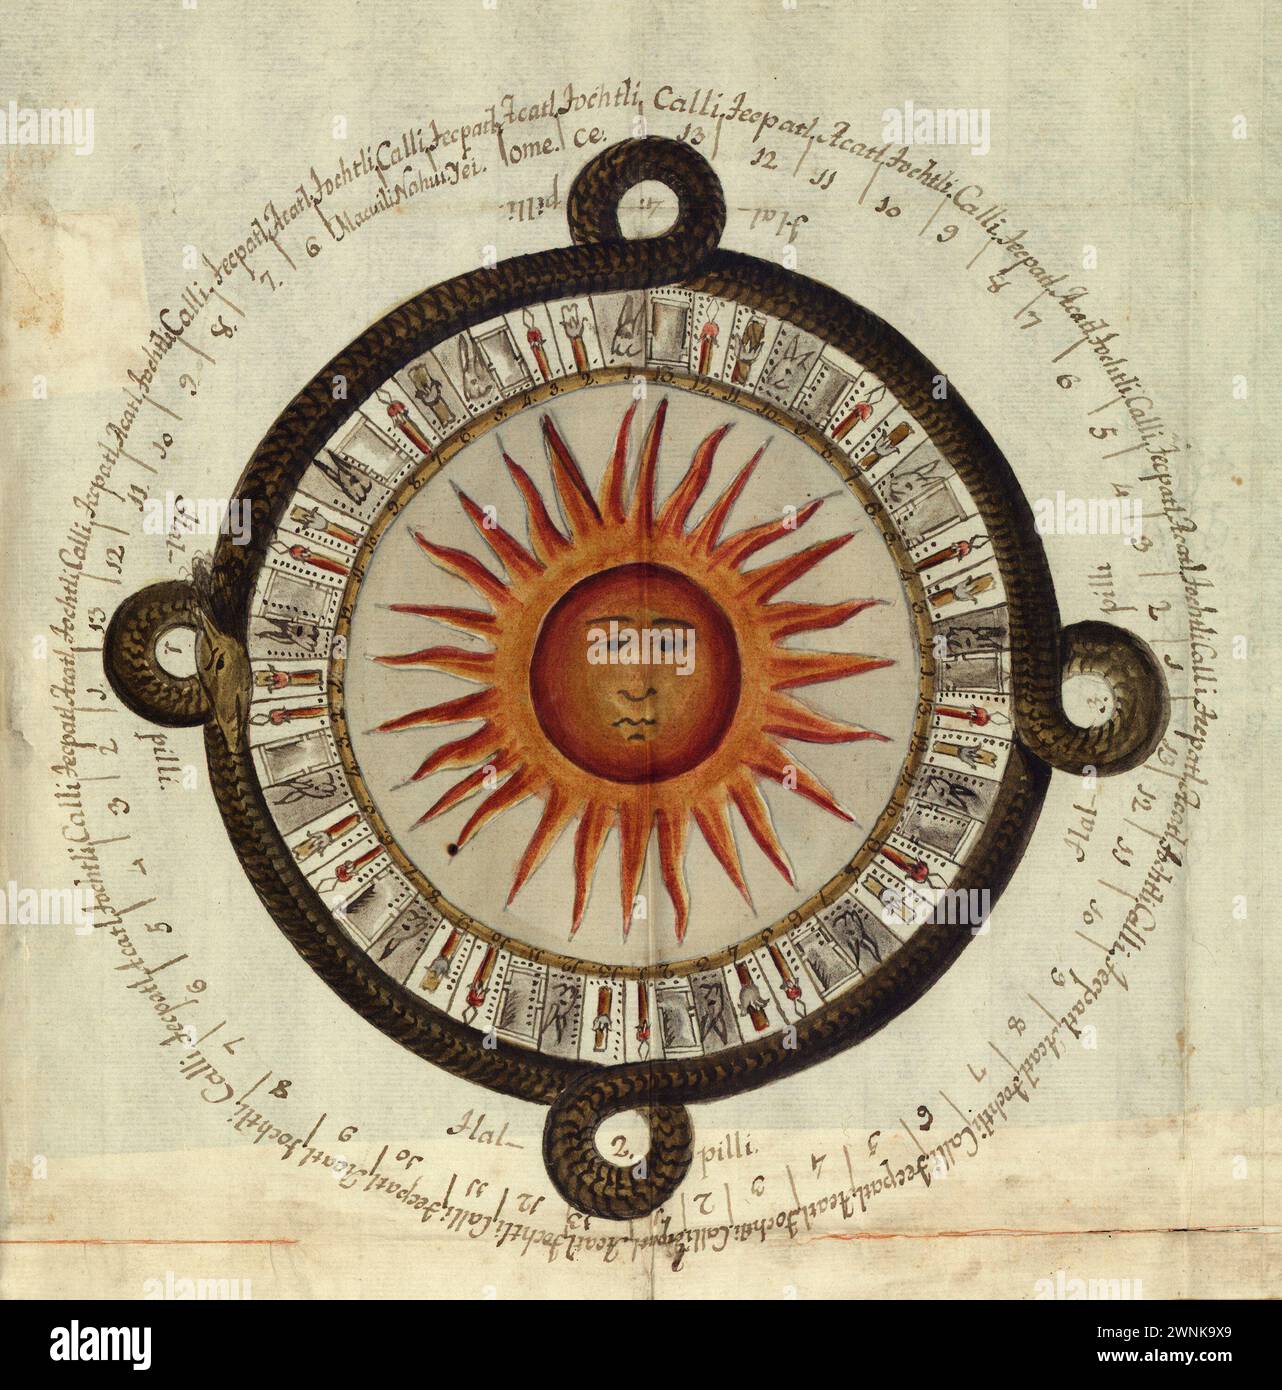 Vintage image depicting an aztec sun calendar. From 'Historical and chronological description of the two stones found during the new paving of the Mexico's main plaza.' in English ) by Antonio de Leon y Gama (1792). Stock Photo